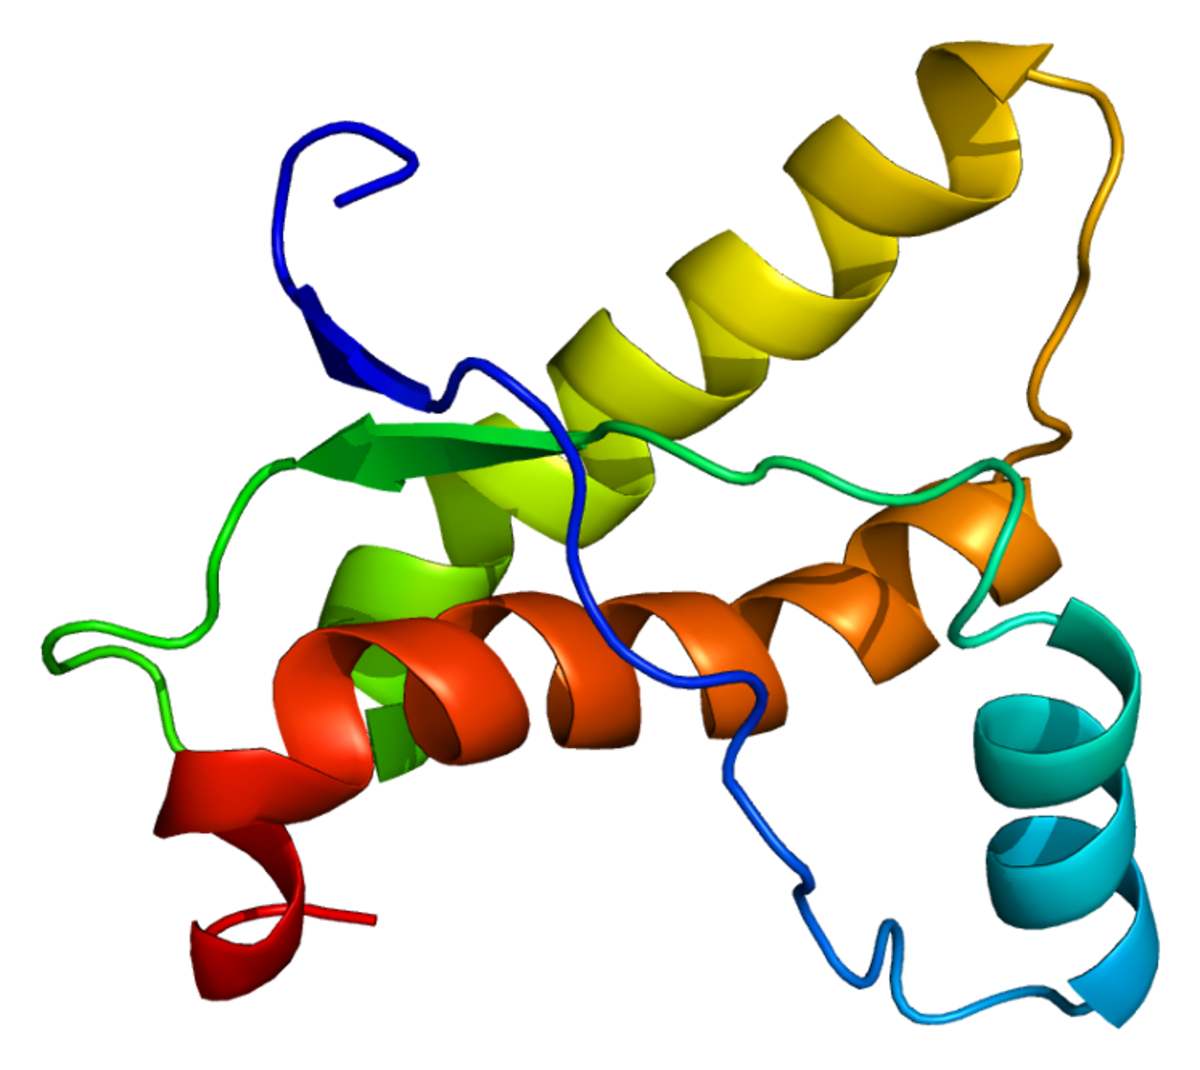 A prion protein.